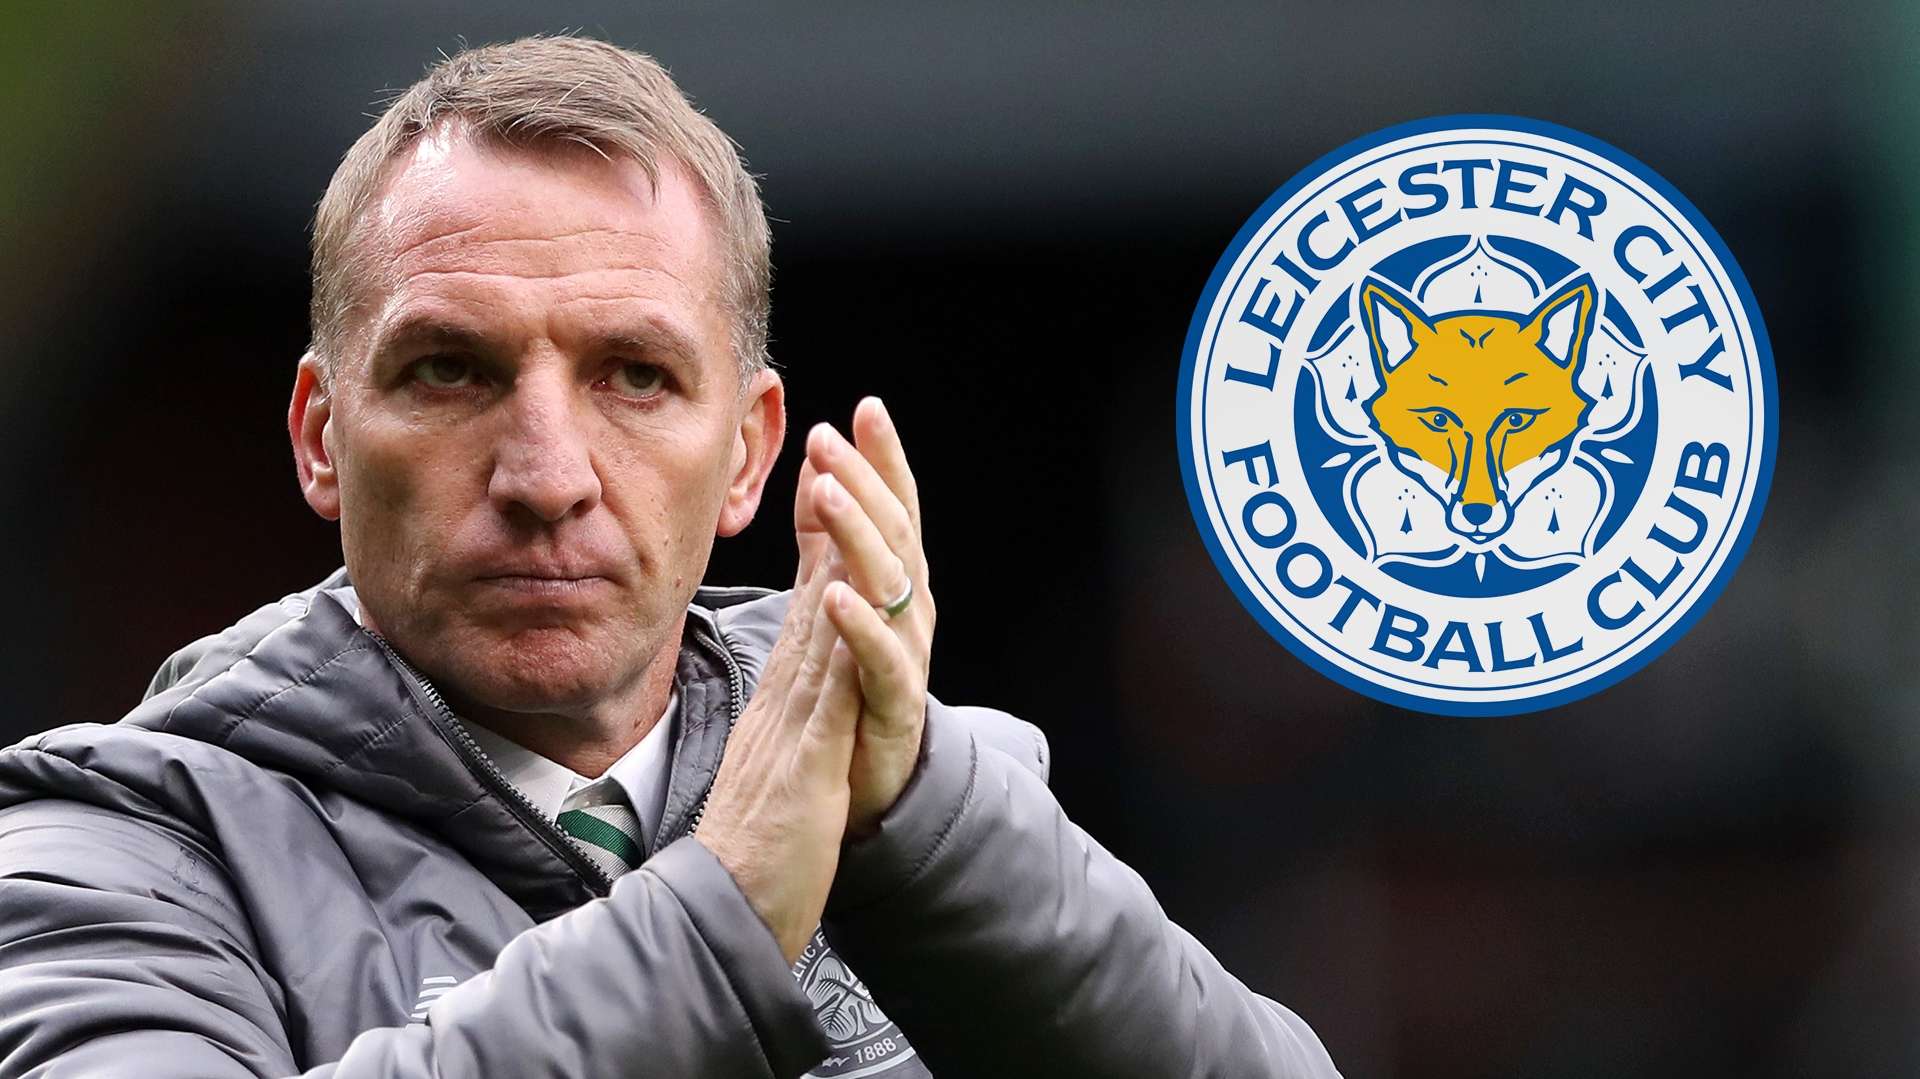 Brendan Rodgers Leicester City